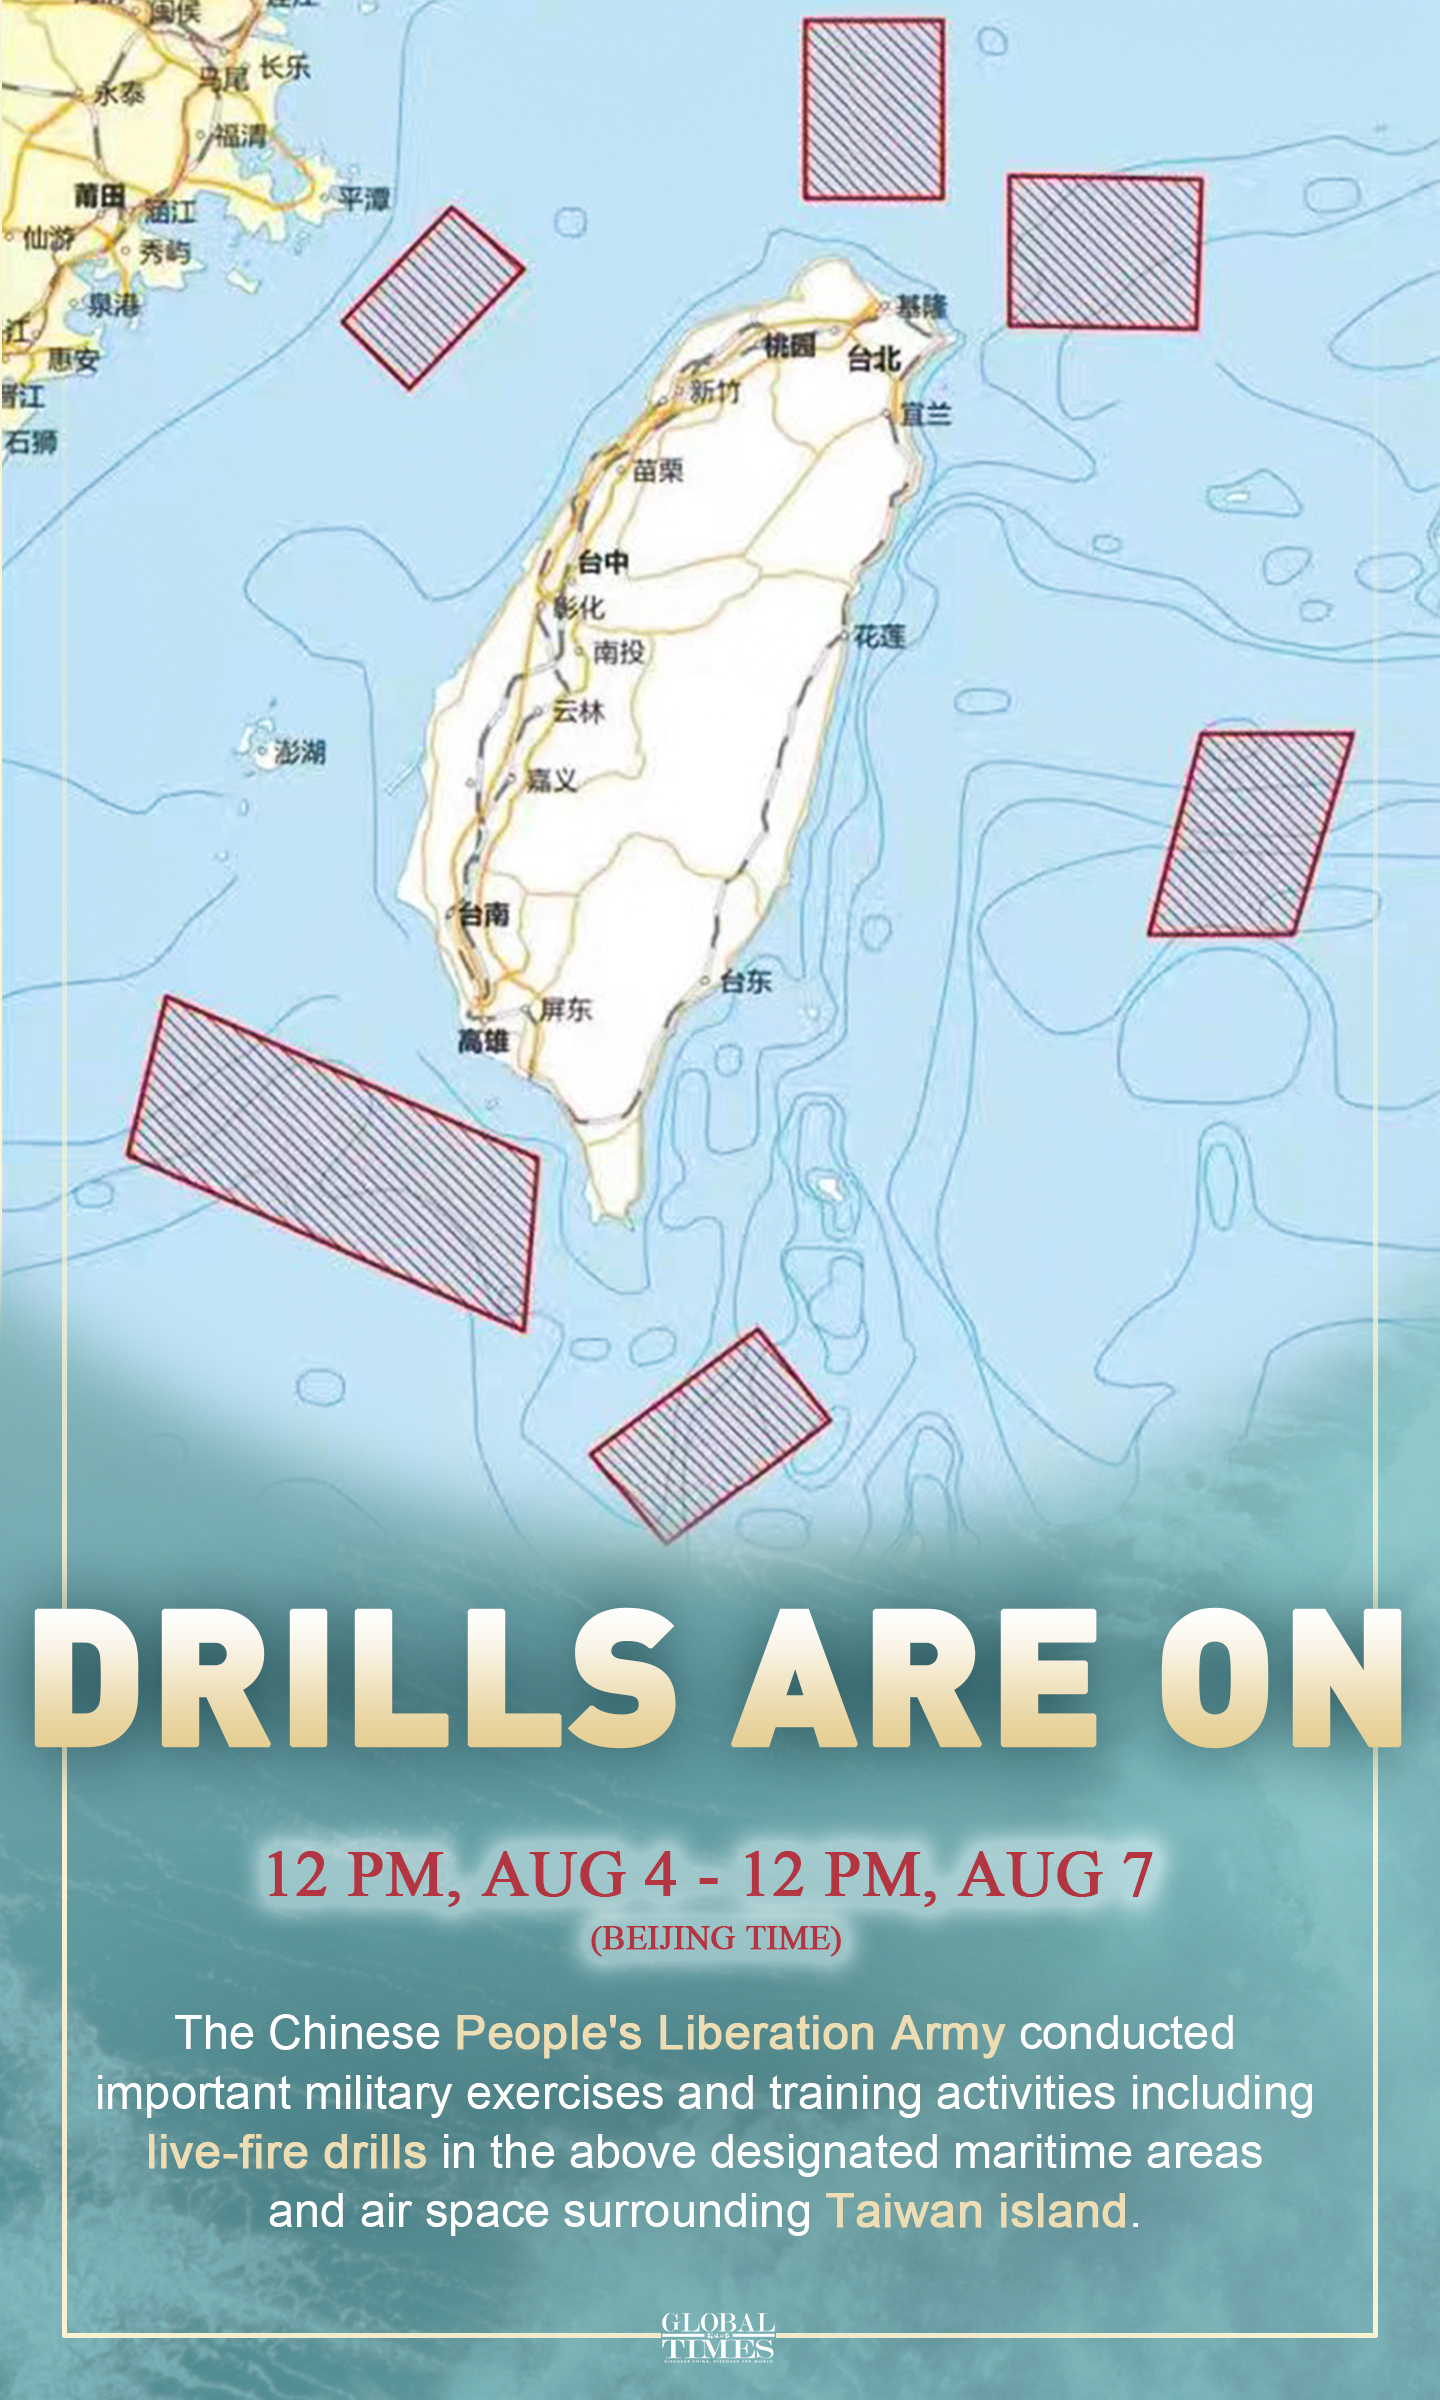 The Chinese PLA conducted important military exercises and training activities including live-fire drills surrounding Taiwan island from 12 pm, Aug 4 to 12 pm, Aug 7. The drills are a stern deterrence against the US' recent provocations on the Taiwan question. Graphic:GT